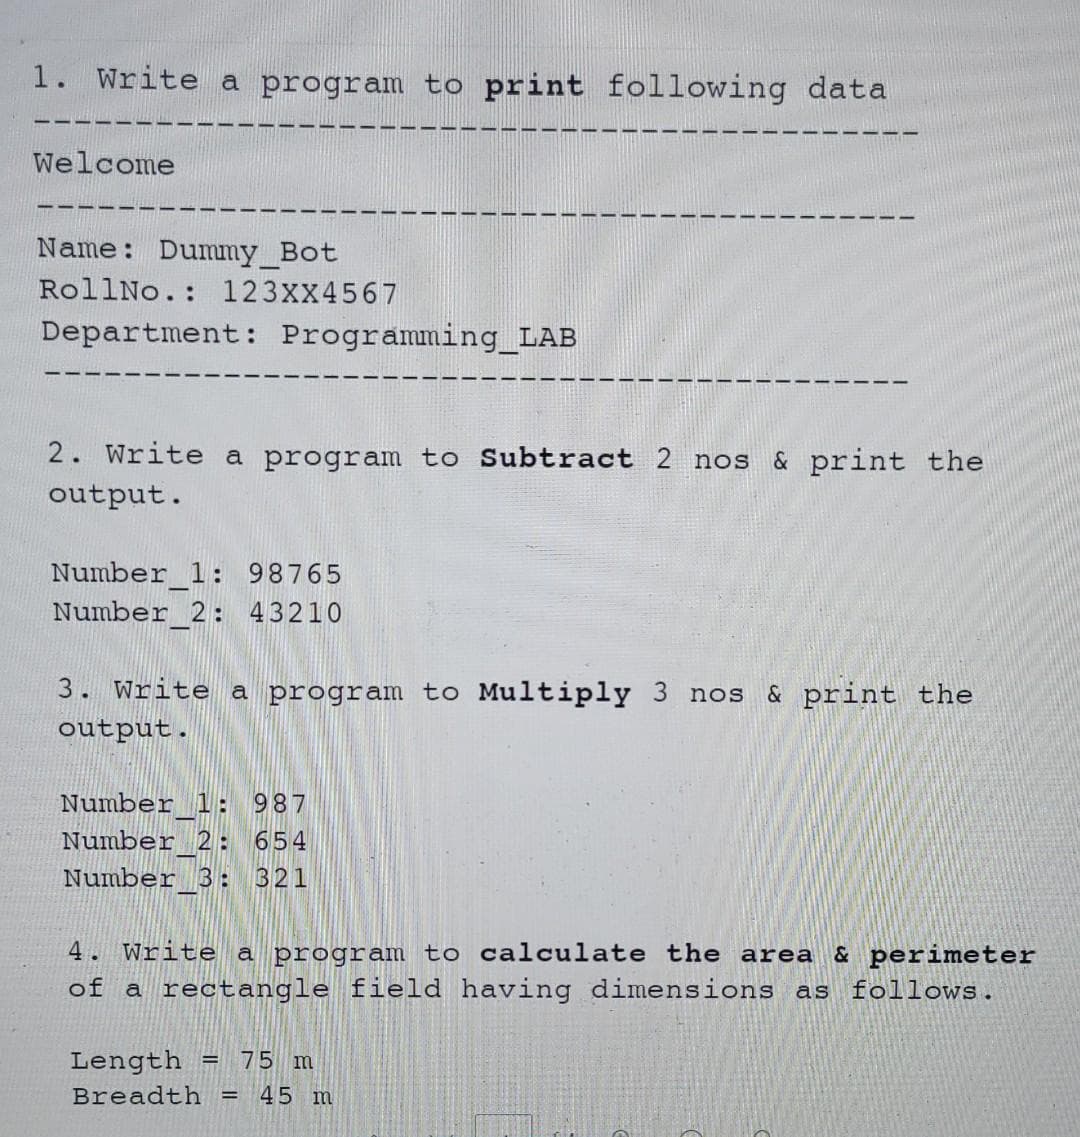 1. Write a program to print following data
Welcome
Name: Dummy_Bot
RollNo.: 123XX4567
Department: Programming_LAB
2. Write
a program to Subtract 2 nos & print the
output.
Number_1: 98765
Number 2: 43210
3. Write a program to Multiply 3 nos & print the
output.
Number 1: 987
Number 2: 654
Number 3: 321
4. Write a program to calculate the area & perimeter
of a rectangle field having dimensions as follows.
Length
75 m
Breadth =
45 m
